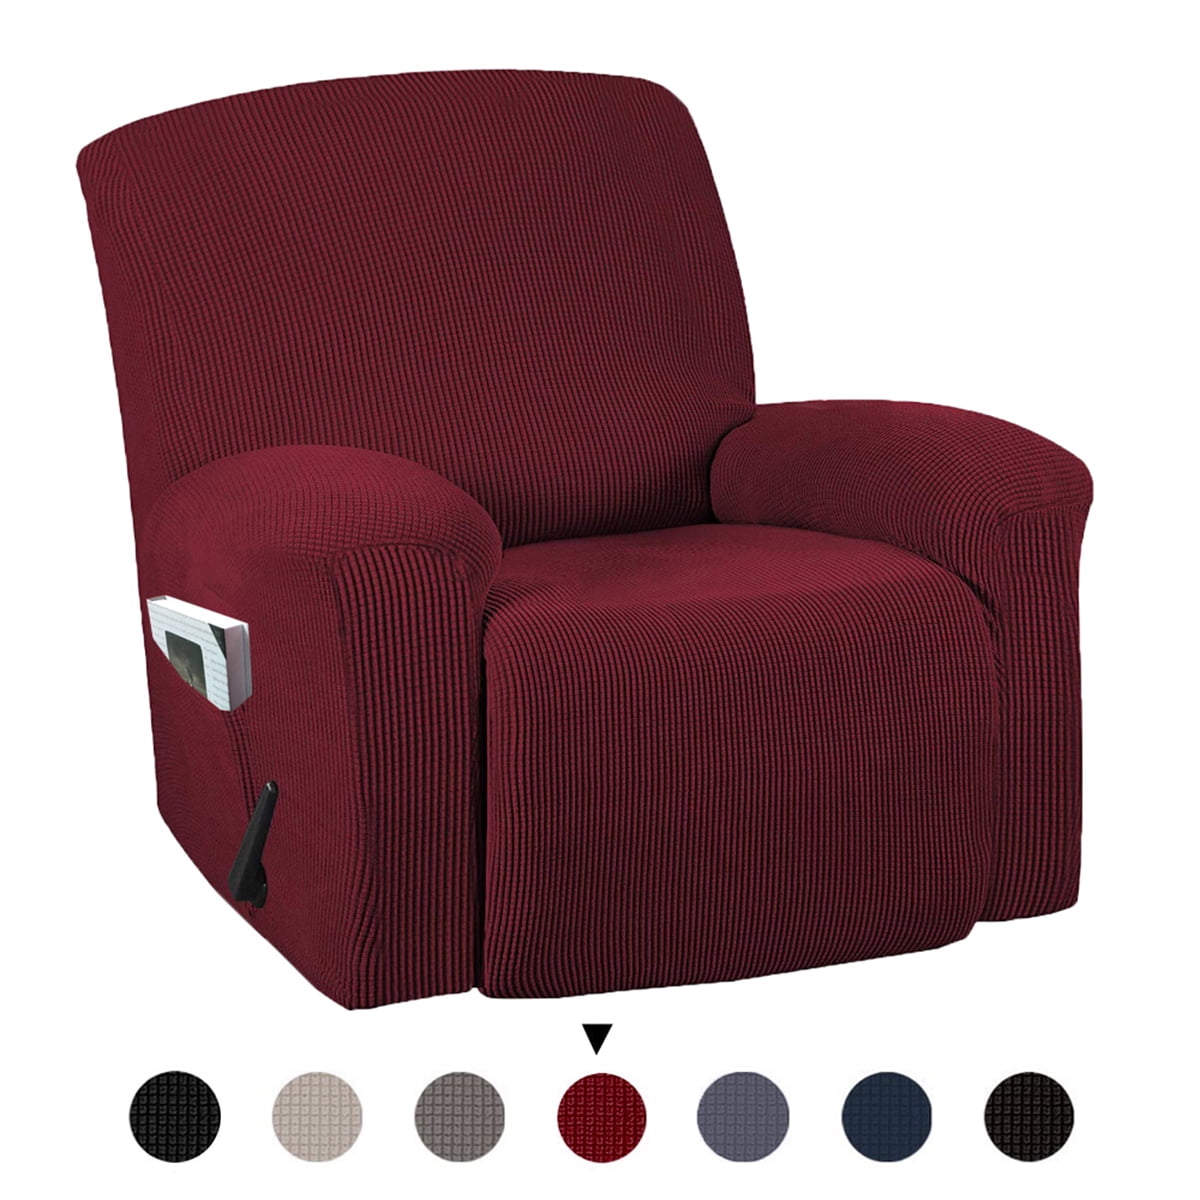 Collin Recliner Slipcover  Red  4 piece slipcover NEW 